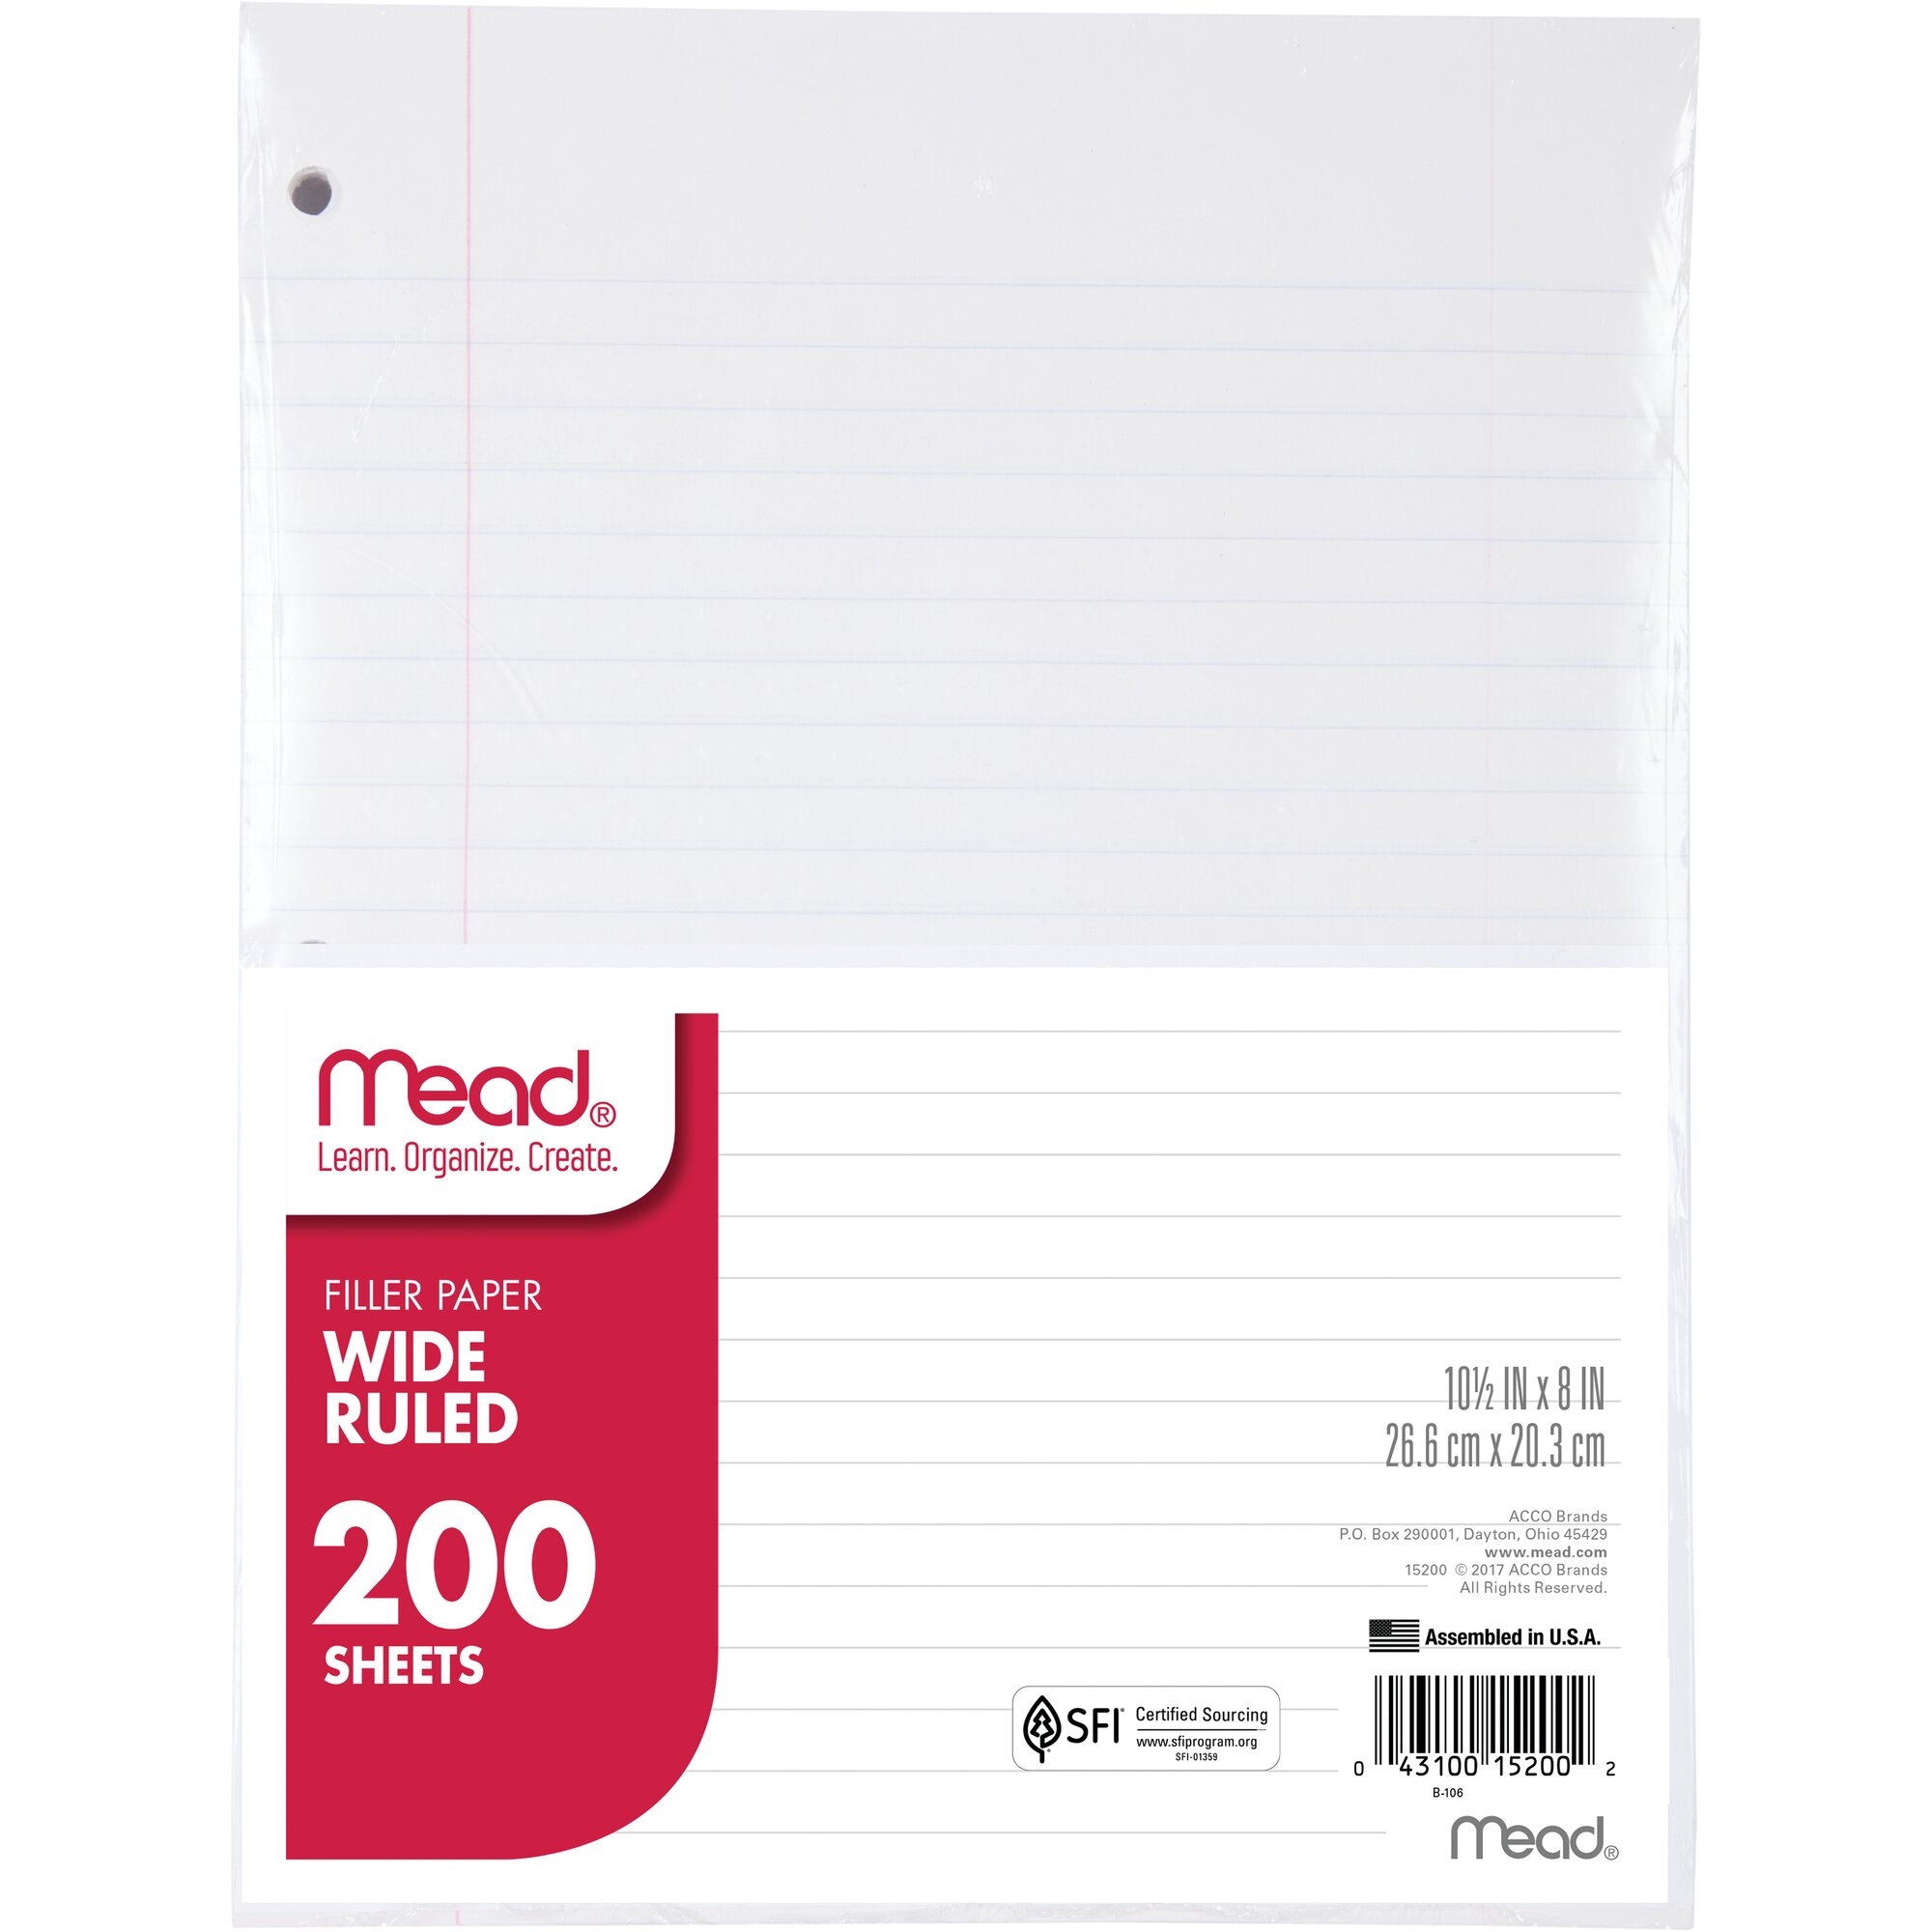 Mead Filler Paper Wide Ruled 10 12 x 8 200 SheetsPack - Paper - image 3 of 3